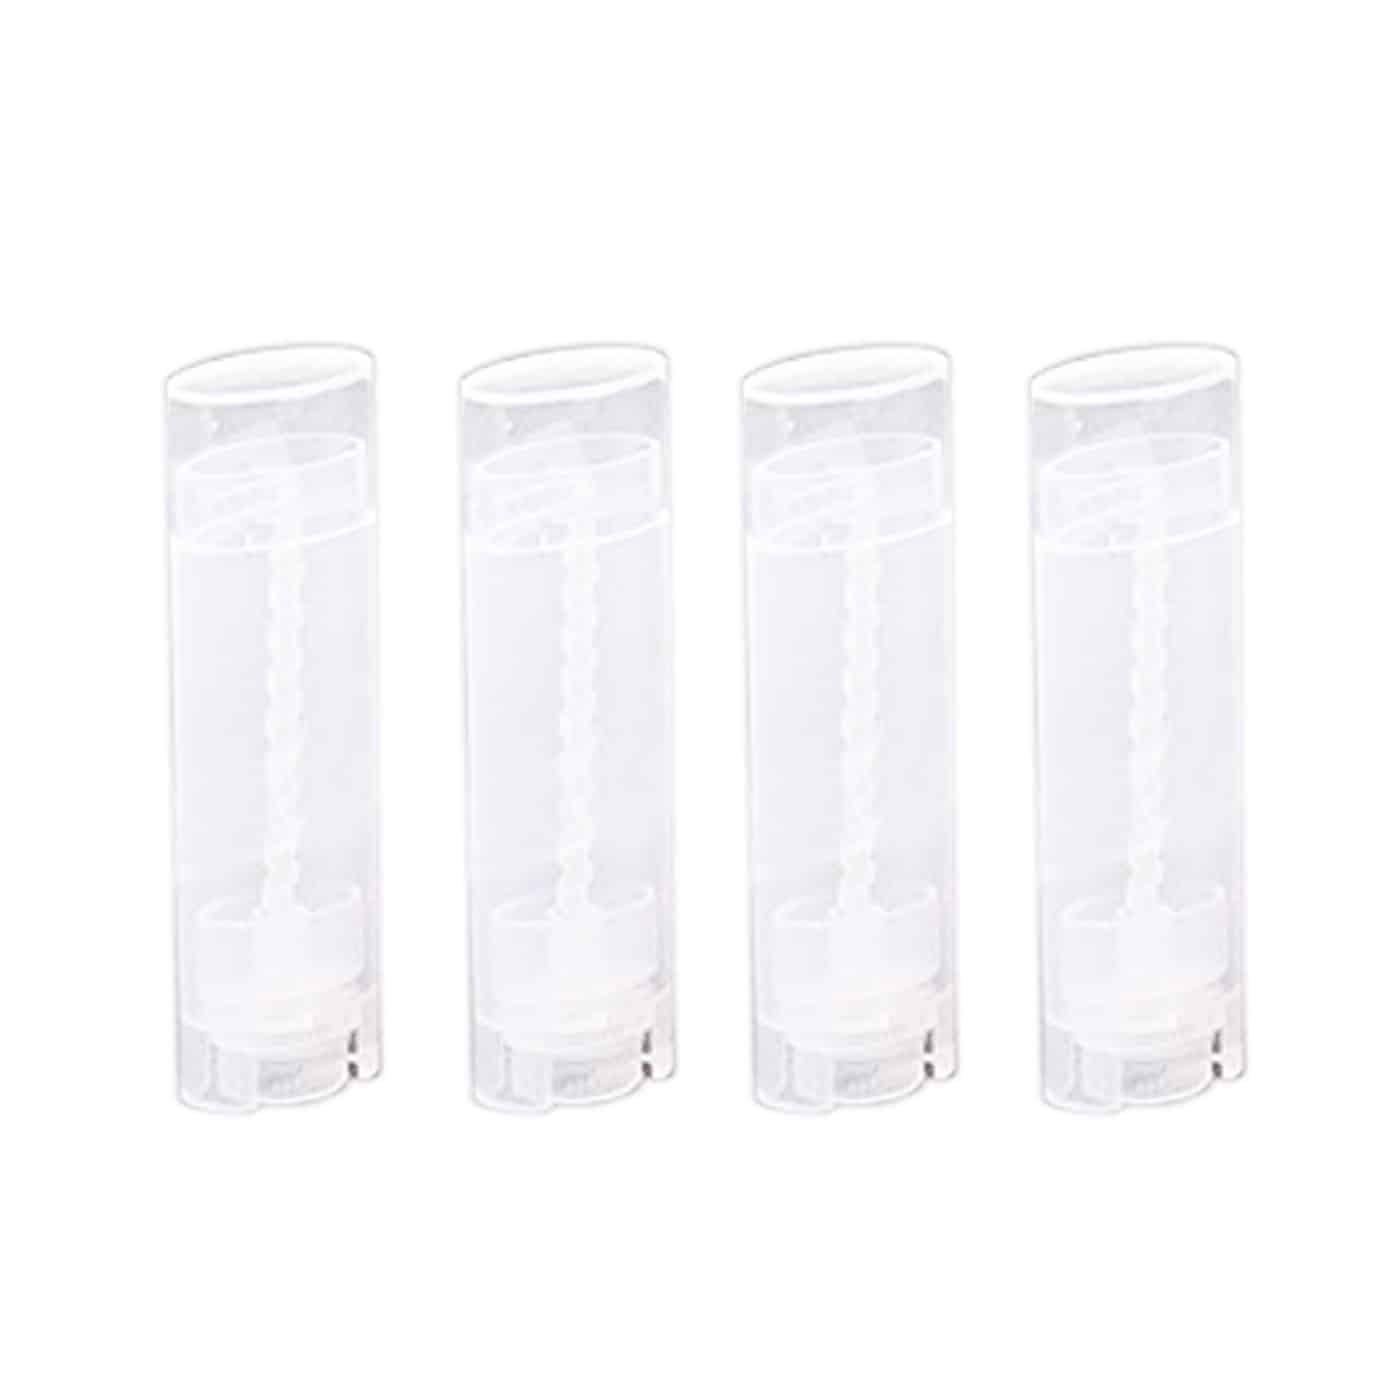 Oval Plastic Lip Balm Tubes With Lids